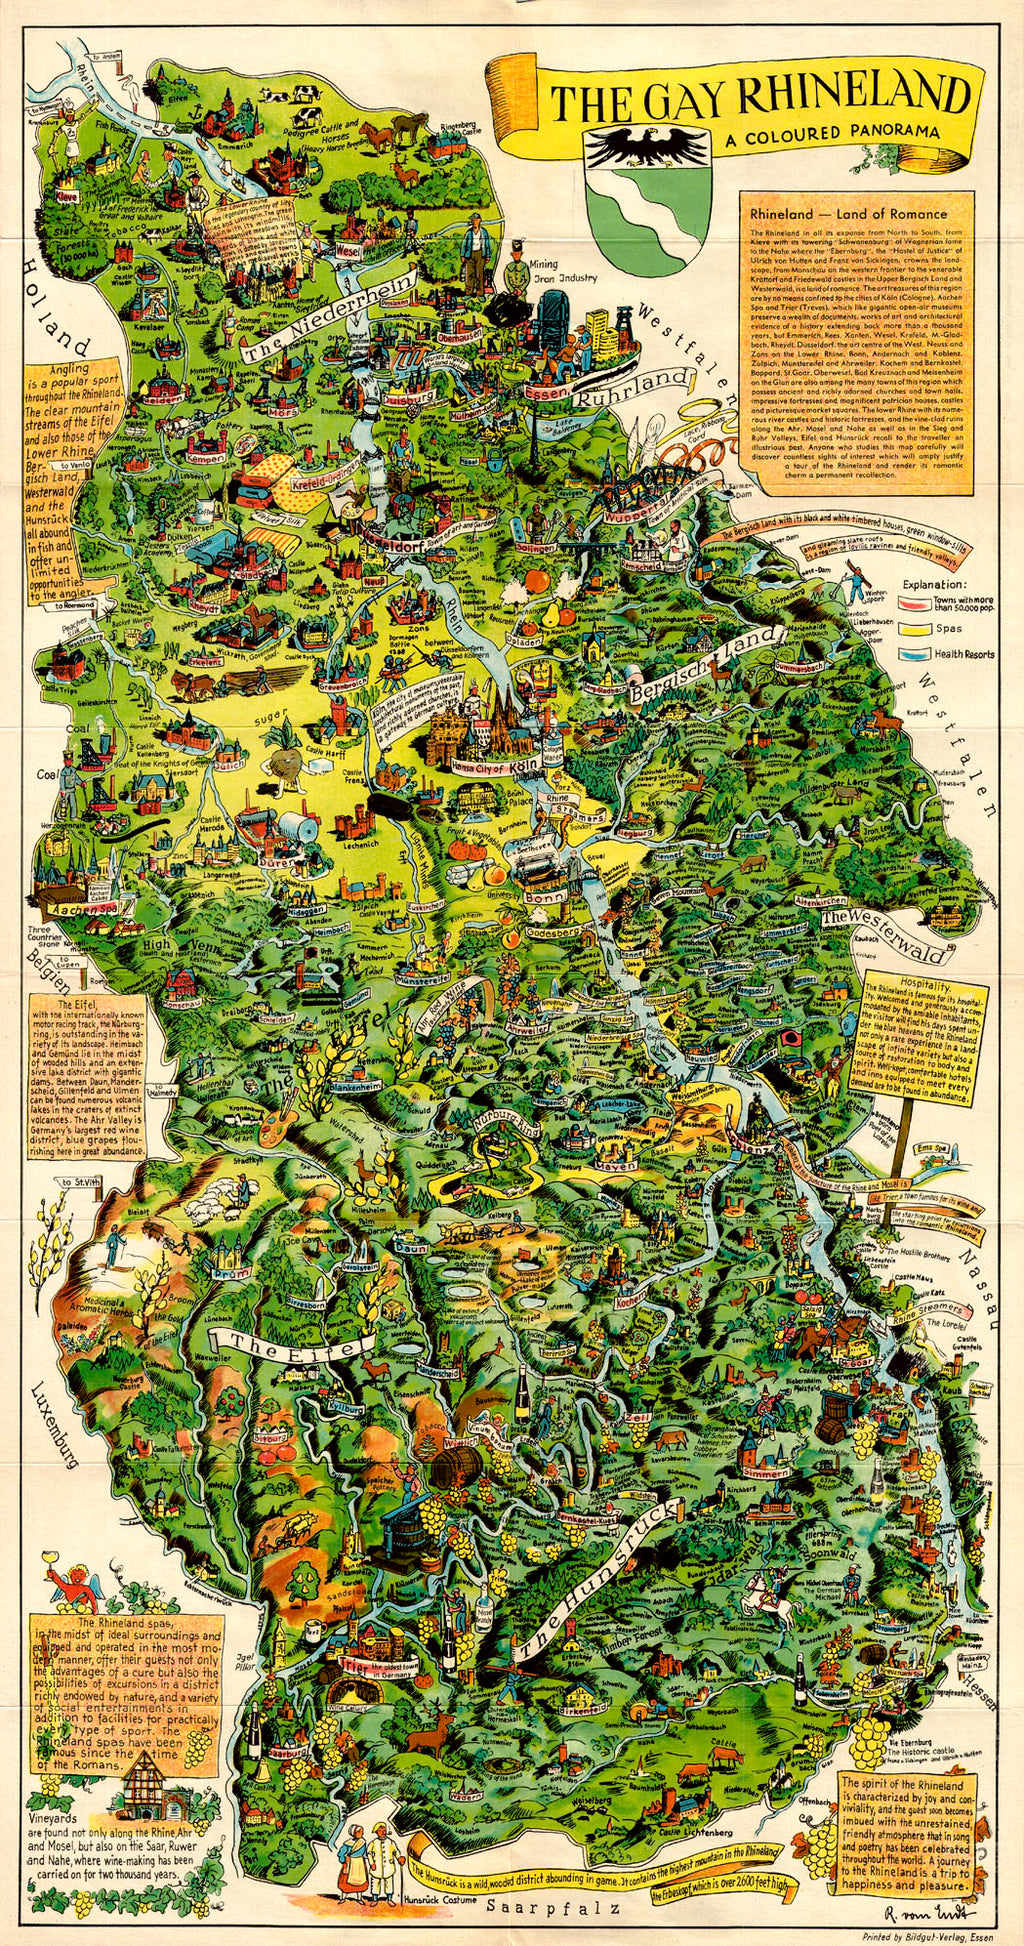 (Germany) The Gay Rhineland - A Coloured Panorama, R von Ernst, c. 1940 A German producded tourist pictorial map from Trier and Castle Lichtenberg, up to Kleve and the Niederrhein. Color swathes throughout this map identify "Towns with more than 50,000 pop." (red), "Spas" (yellow), "Health Resorts" (blue). Dozens upon dozens of vignettes and notations speak to regional history and character deutsche Karte Rhineland